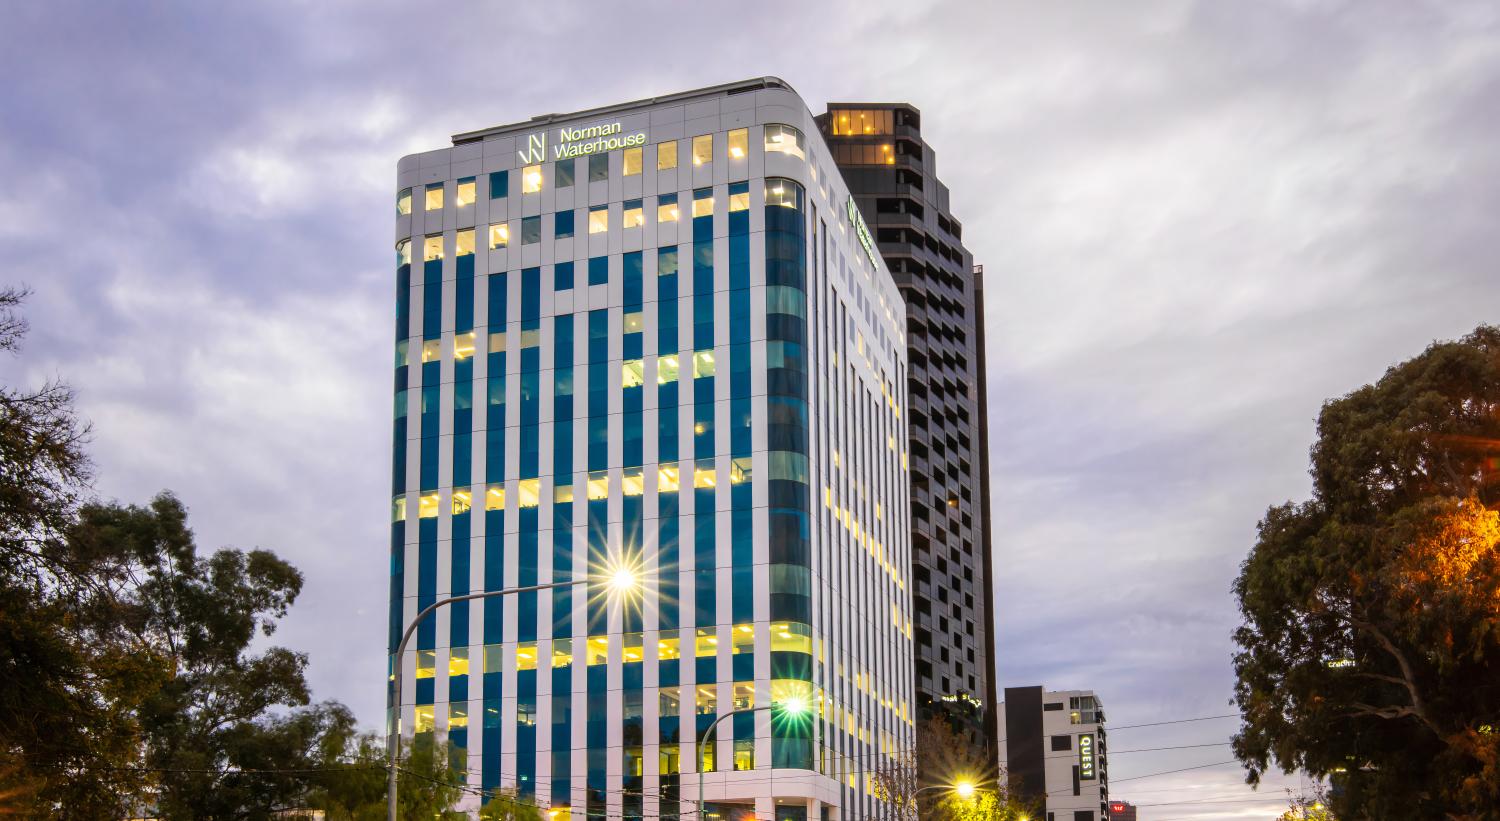 Exterior view of tall corporate building